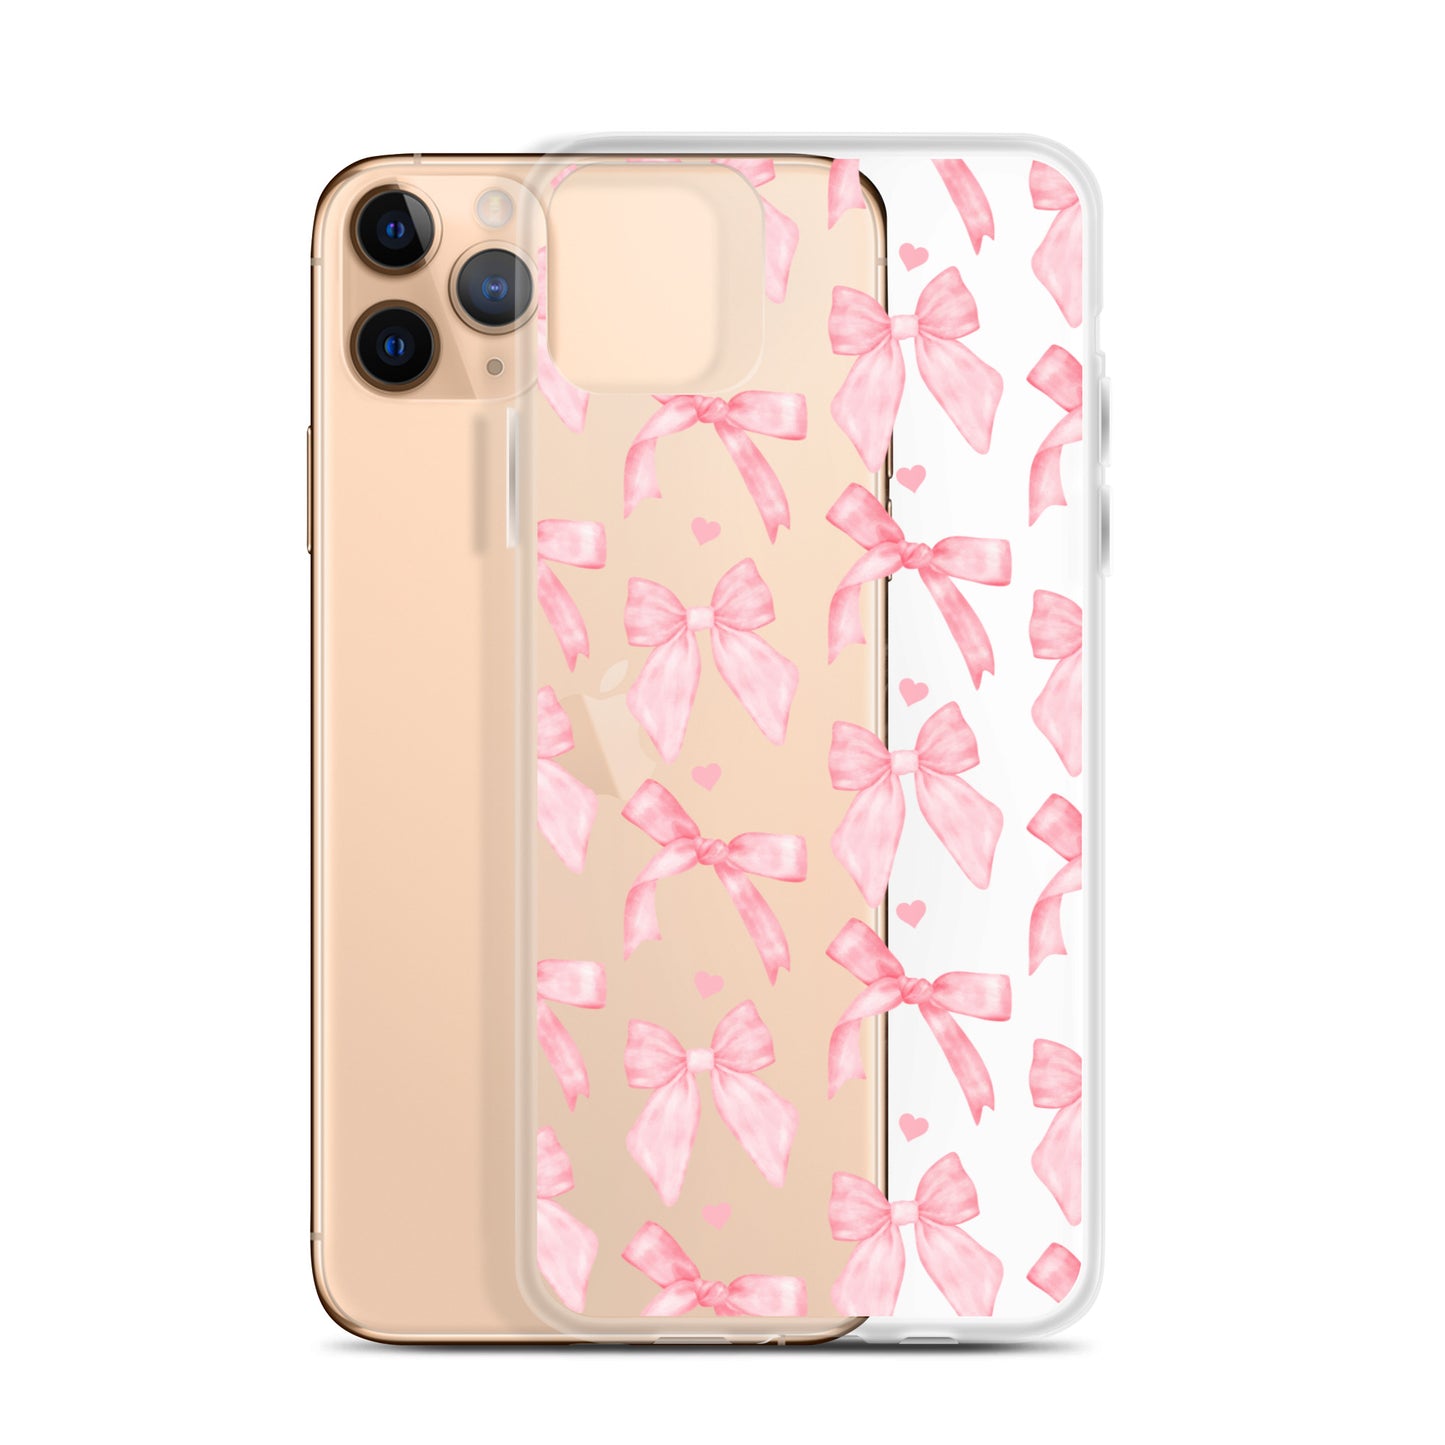 Flirty Bows Clear iPhone Case